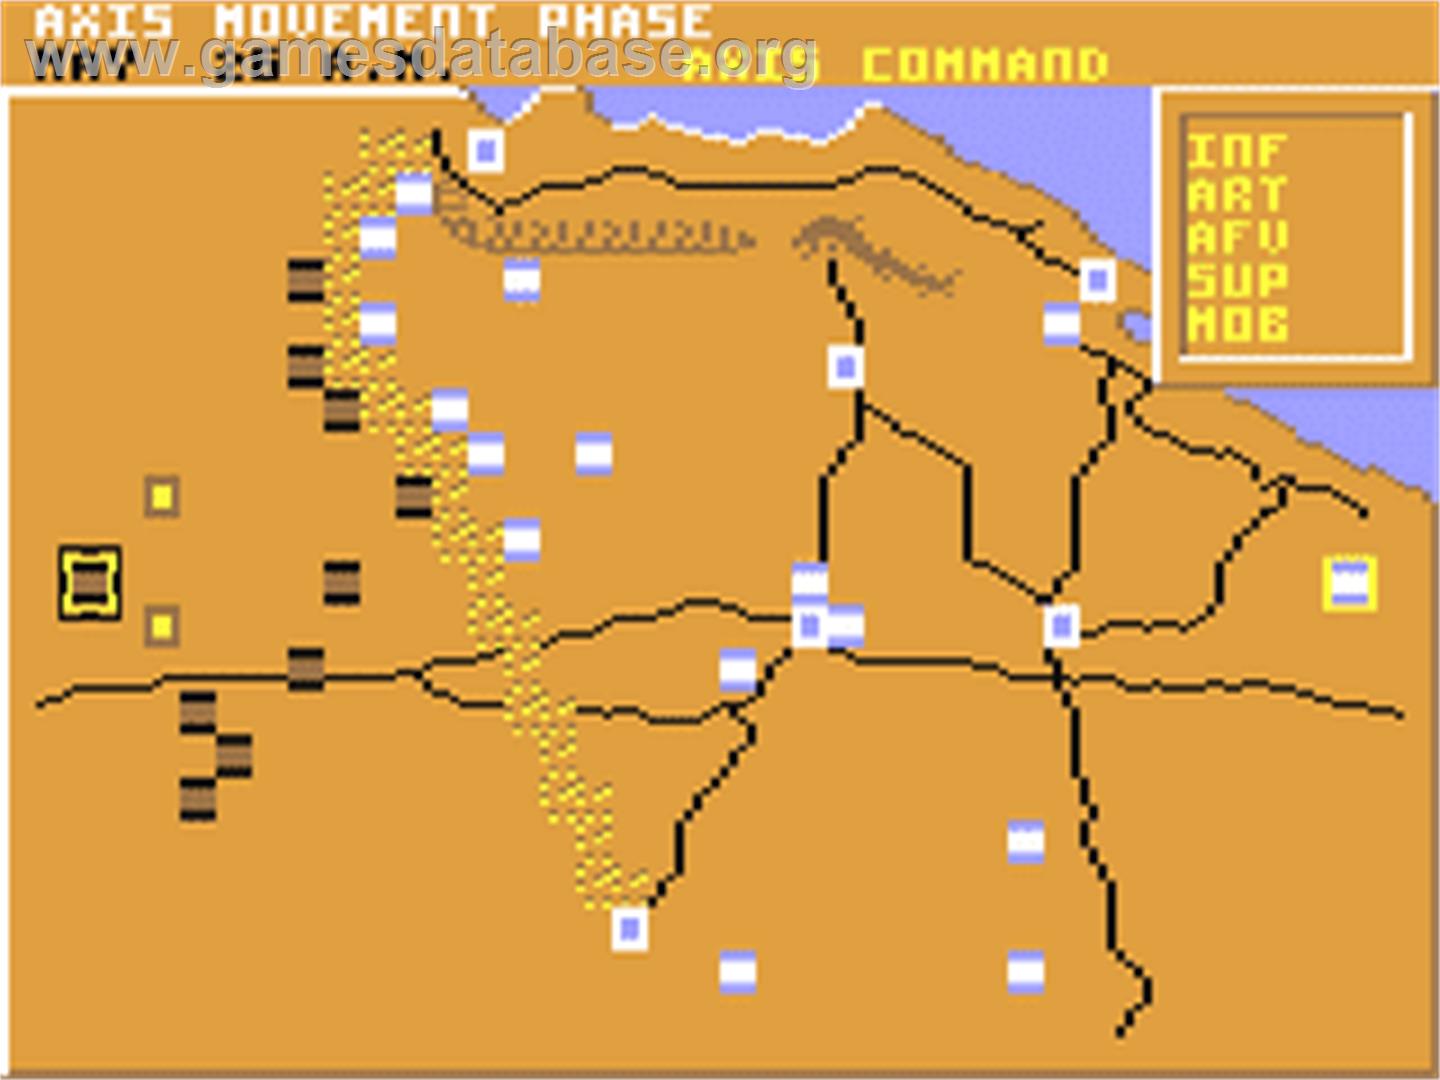 Tobruk: The Clash of Armour - Commodore 64 - Artwork - In Game